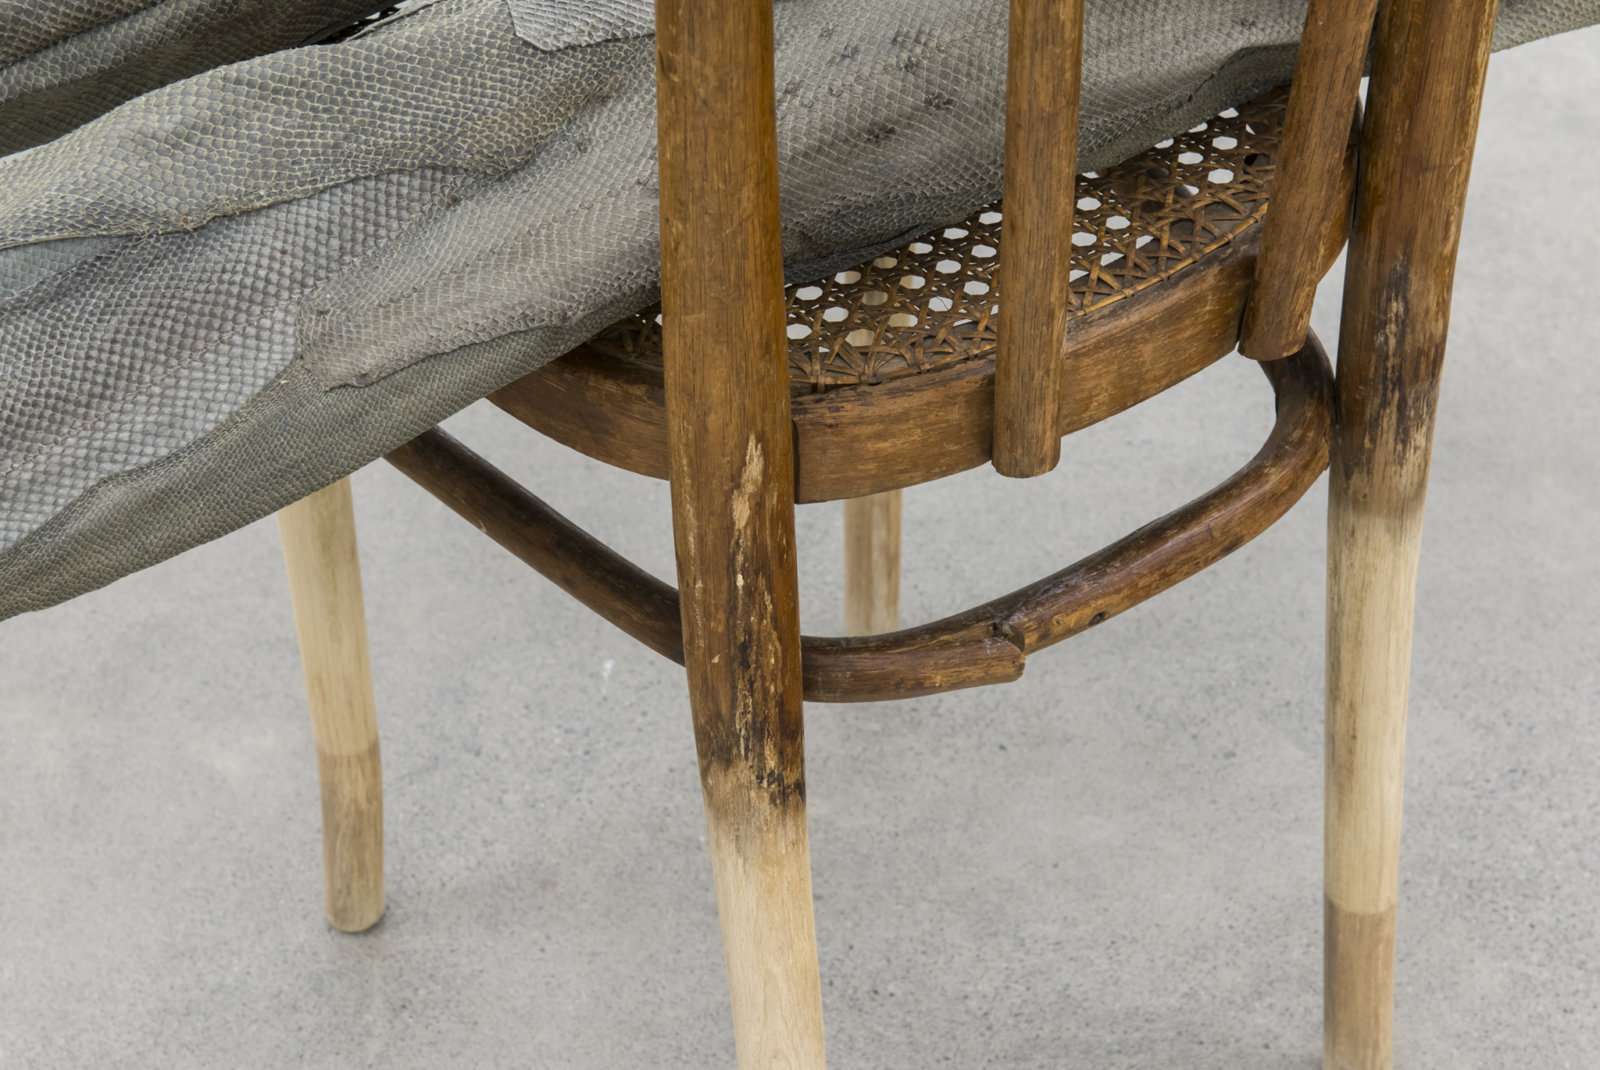 Ashes Withyman, Into the Water (In his Leather Breeches) (detail), 2008, fish leather, cotton thread, maple buttons, wooden chair, 28 x 35 x 15 in. (71 x 89 x 38 cm)